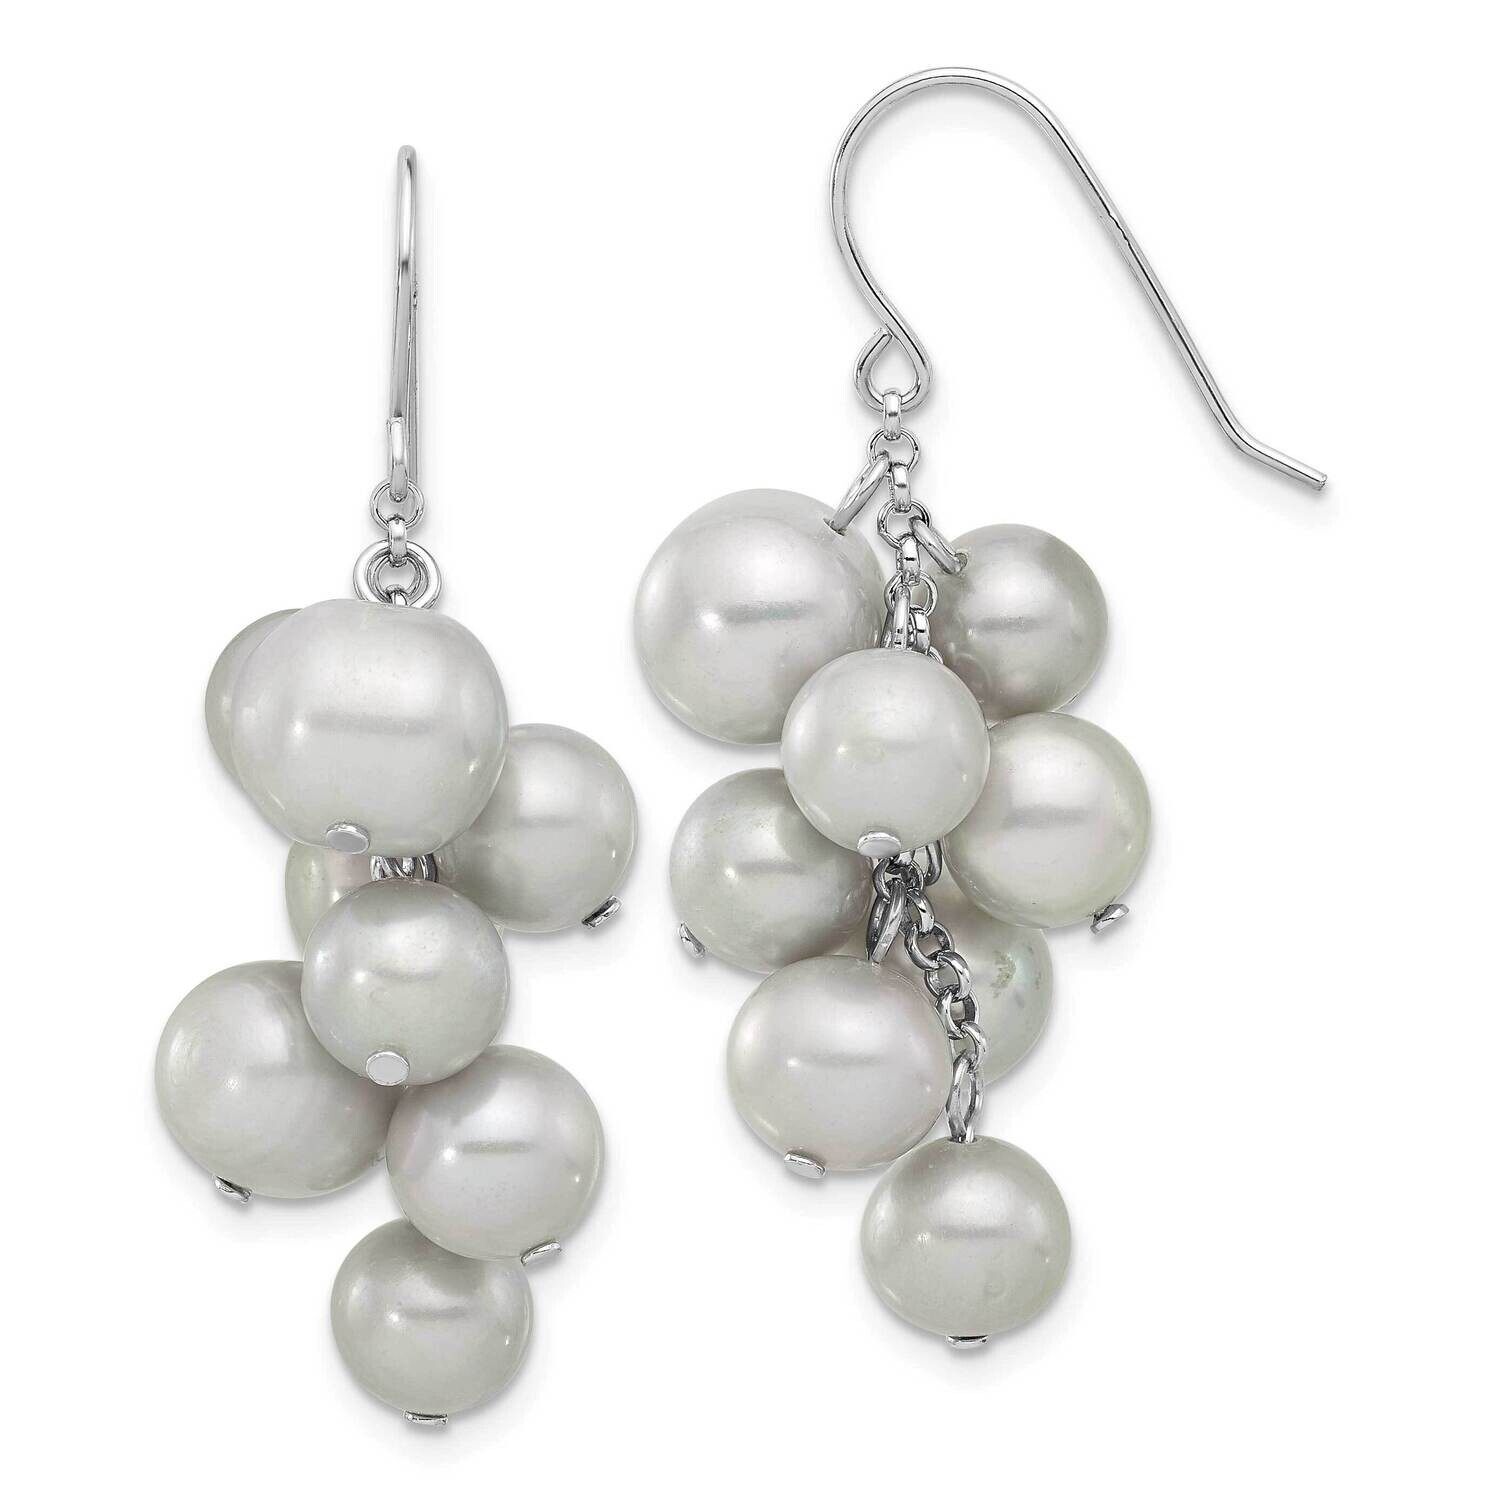 6-10mm Grey Fwc Pearl Dangle Earrings Sterling Silver Rhodium-Plated QE17252